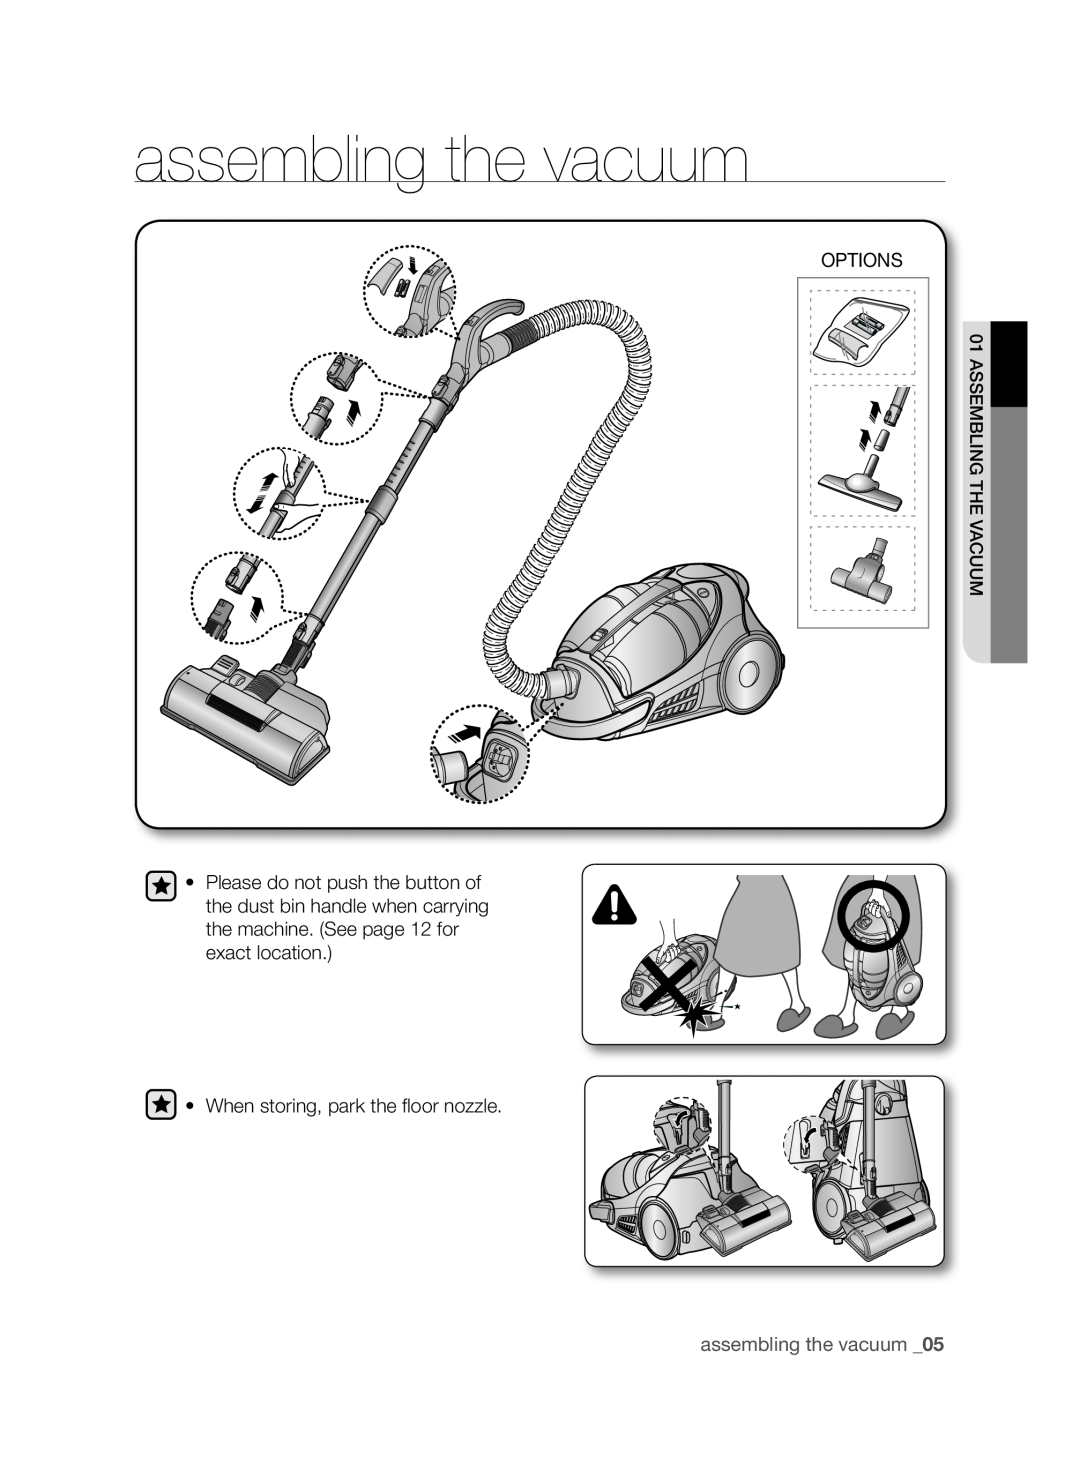 Samsung VCC96P0H1G user manual assembling the vacuum, Options, When storing, park the floor nozzle 